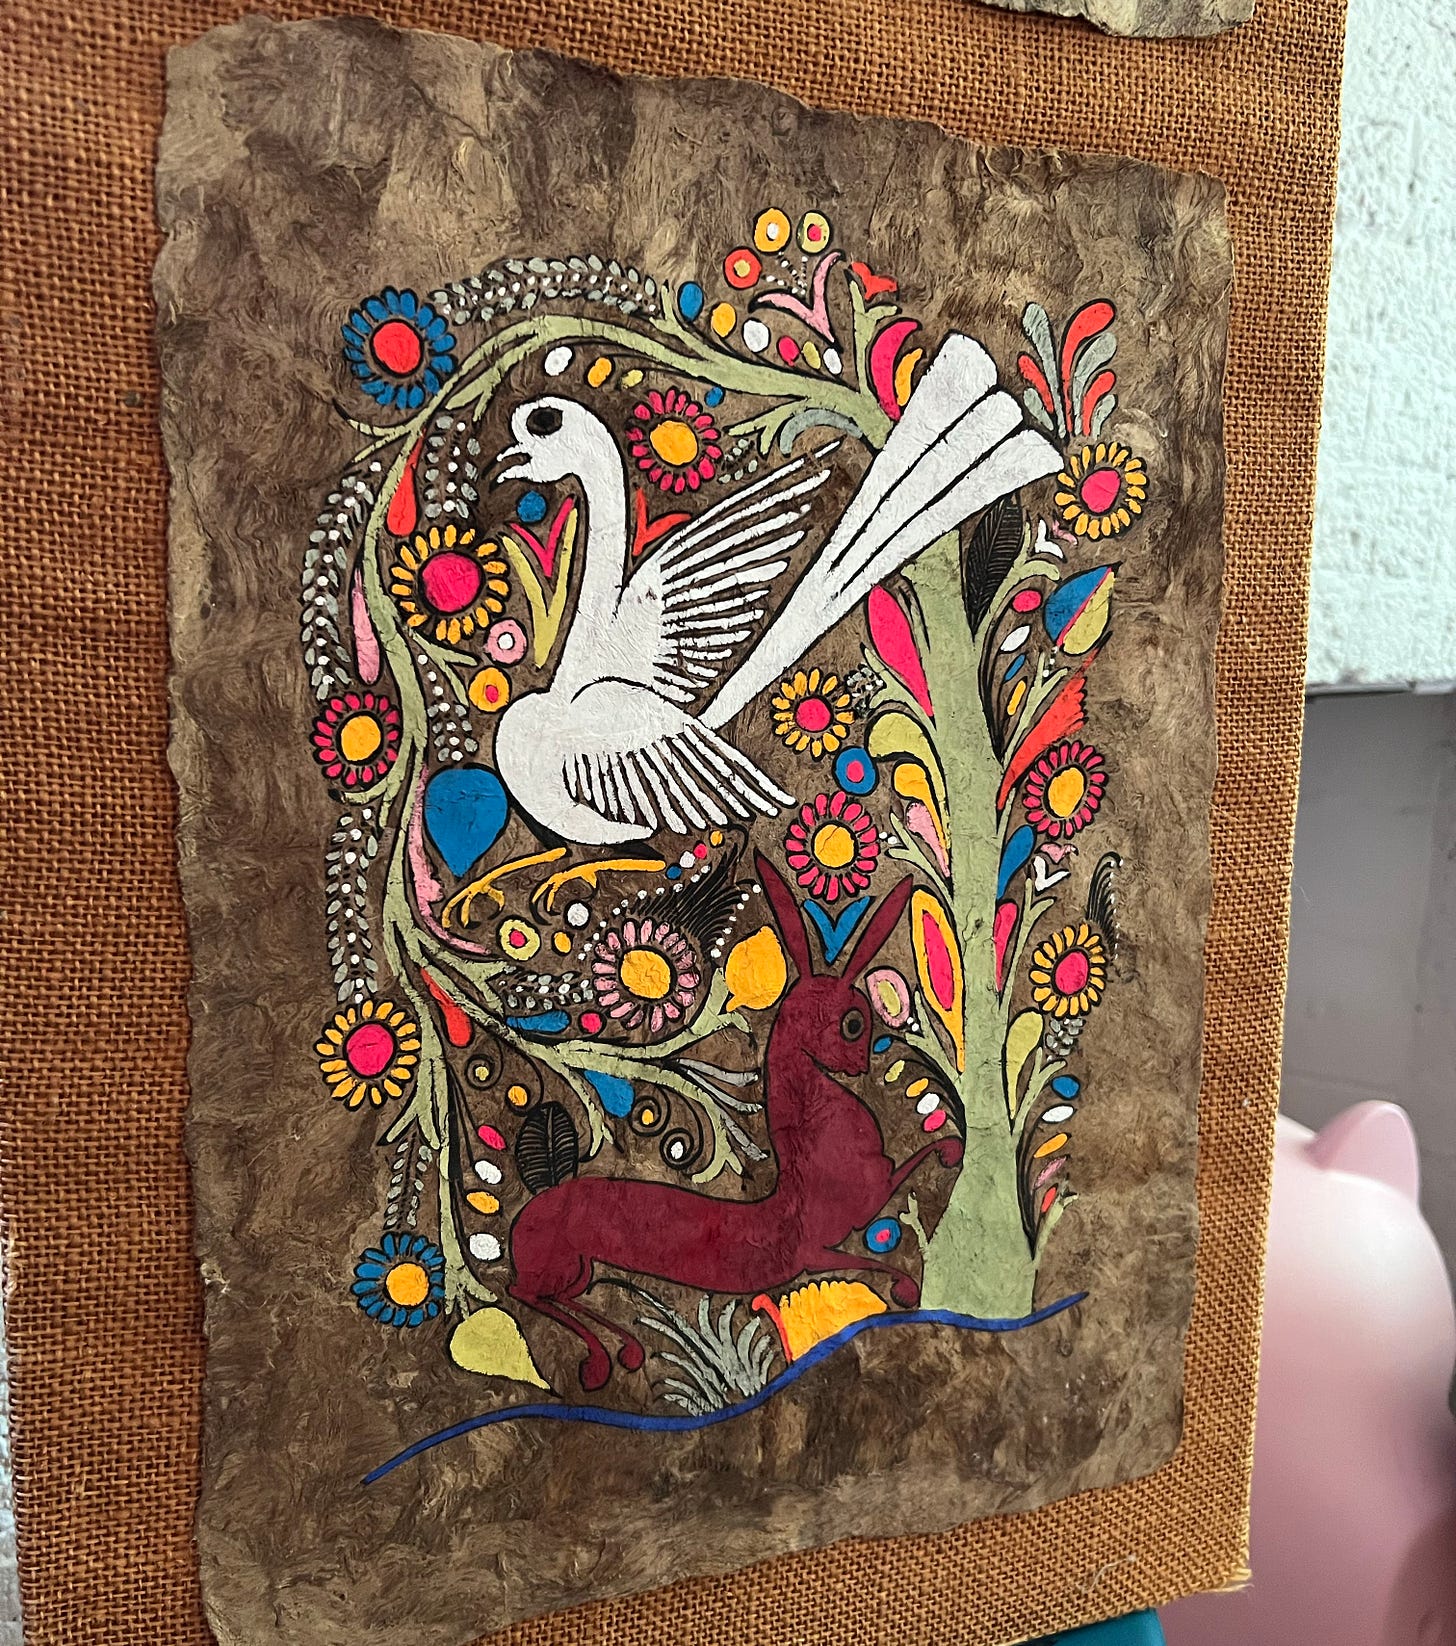 south american folk art painting on bark paper with birds, rabbit, and flowers